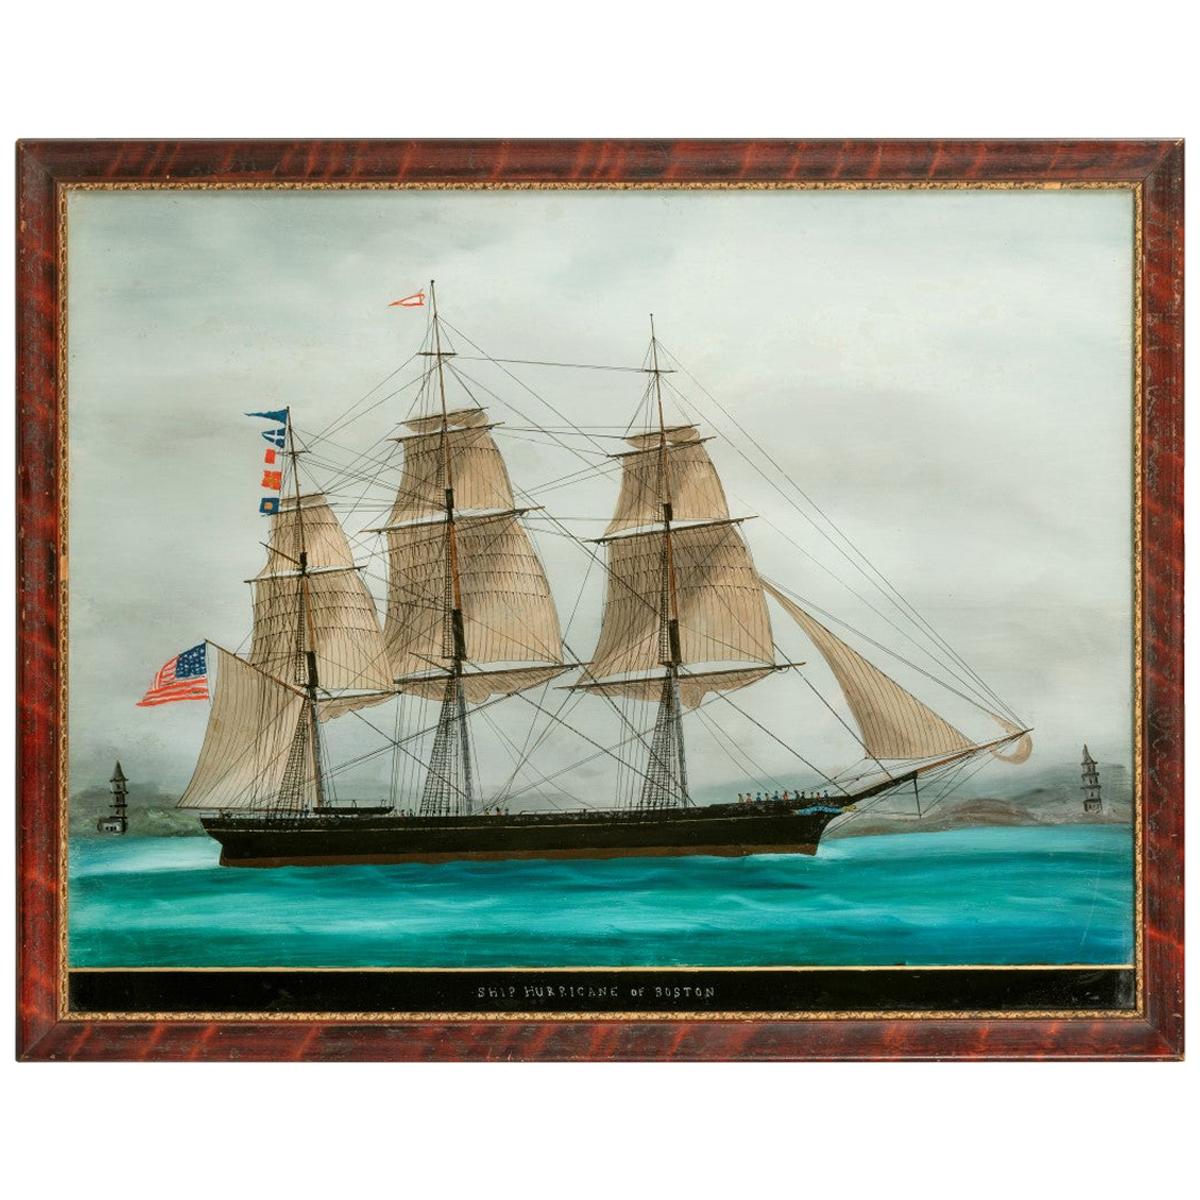 American Reverse-Glass Painting of the Ship ‘Hurricane’ of Boston